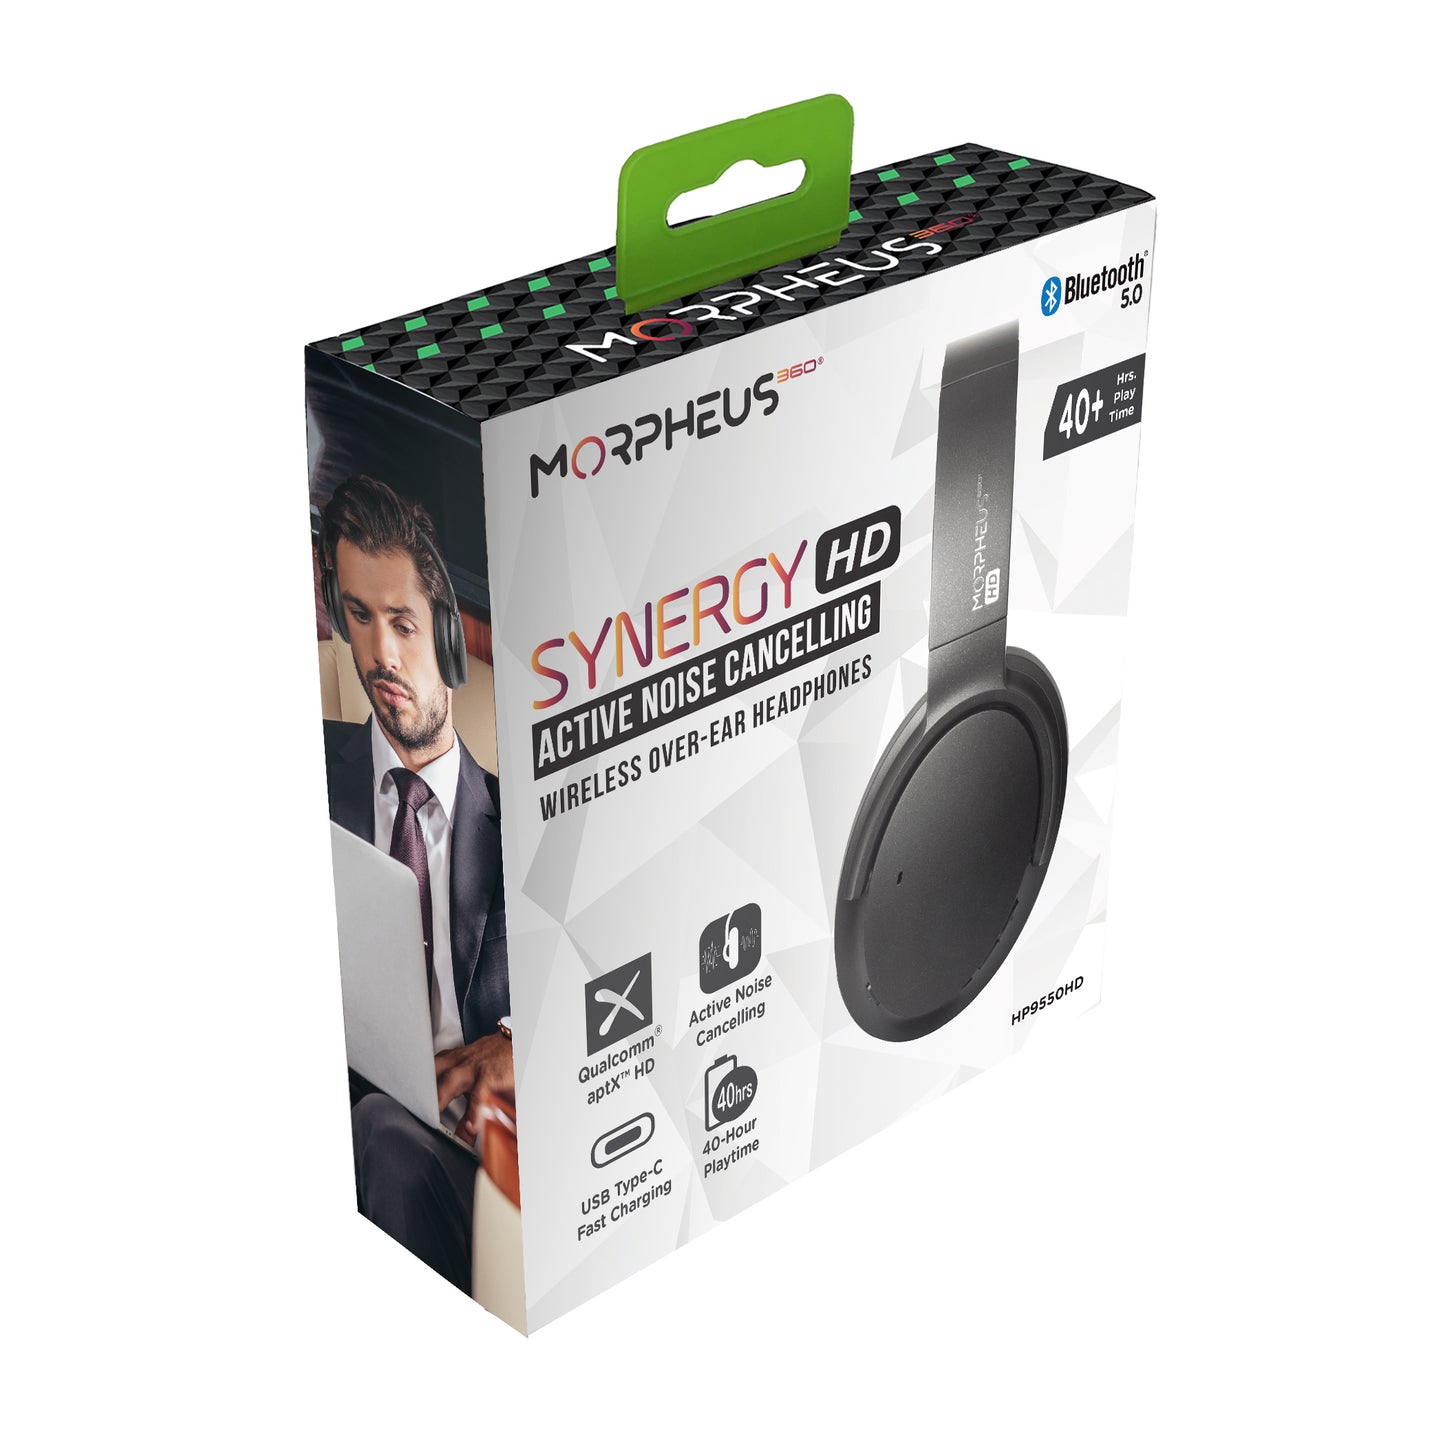 Photo of Morpheus 360 Synergy HD Active Noise Cancelling Wireless Headphones Retail packaging, a side view of the Syngery HD Headphones, features include: Bluetooth 5.0, 40+ Hours of Playtime, Qualcomm aptX HD, Active Noise Cancelling, and USB Type-C Fast Charging.